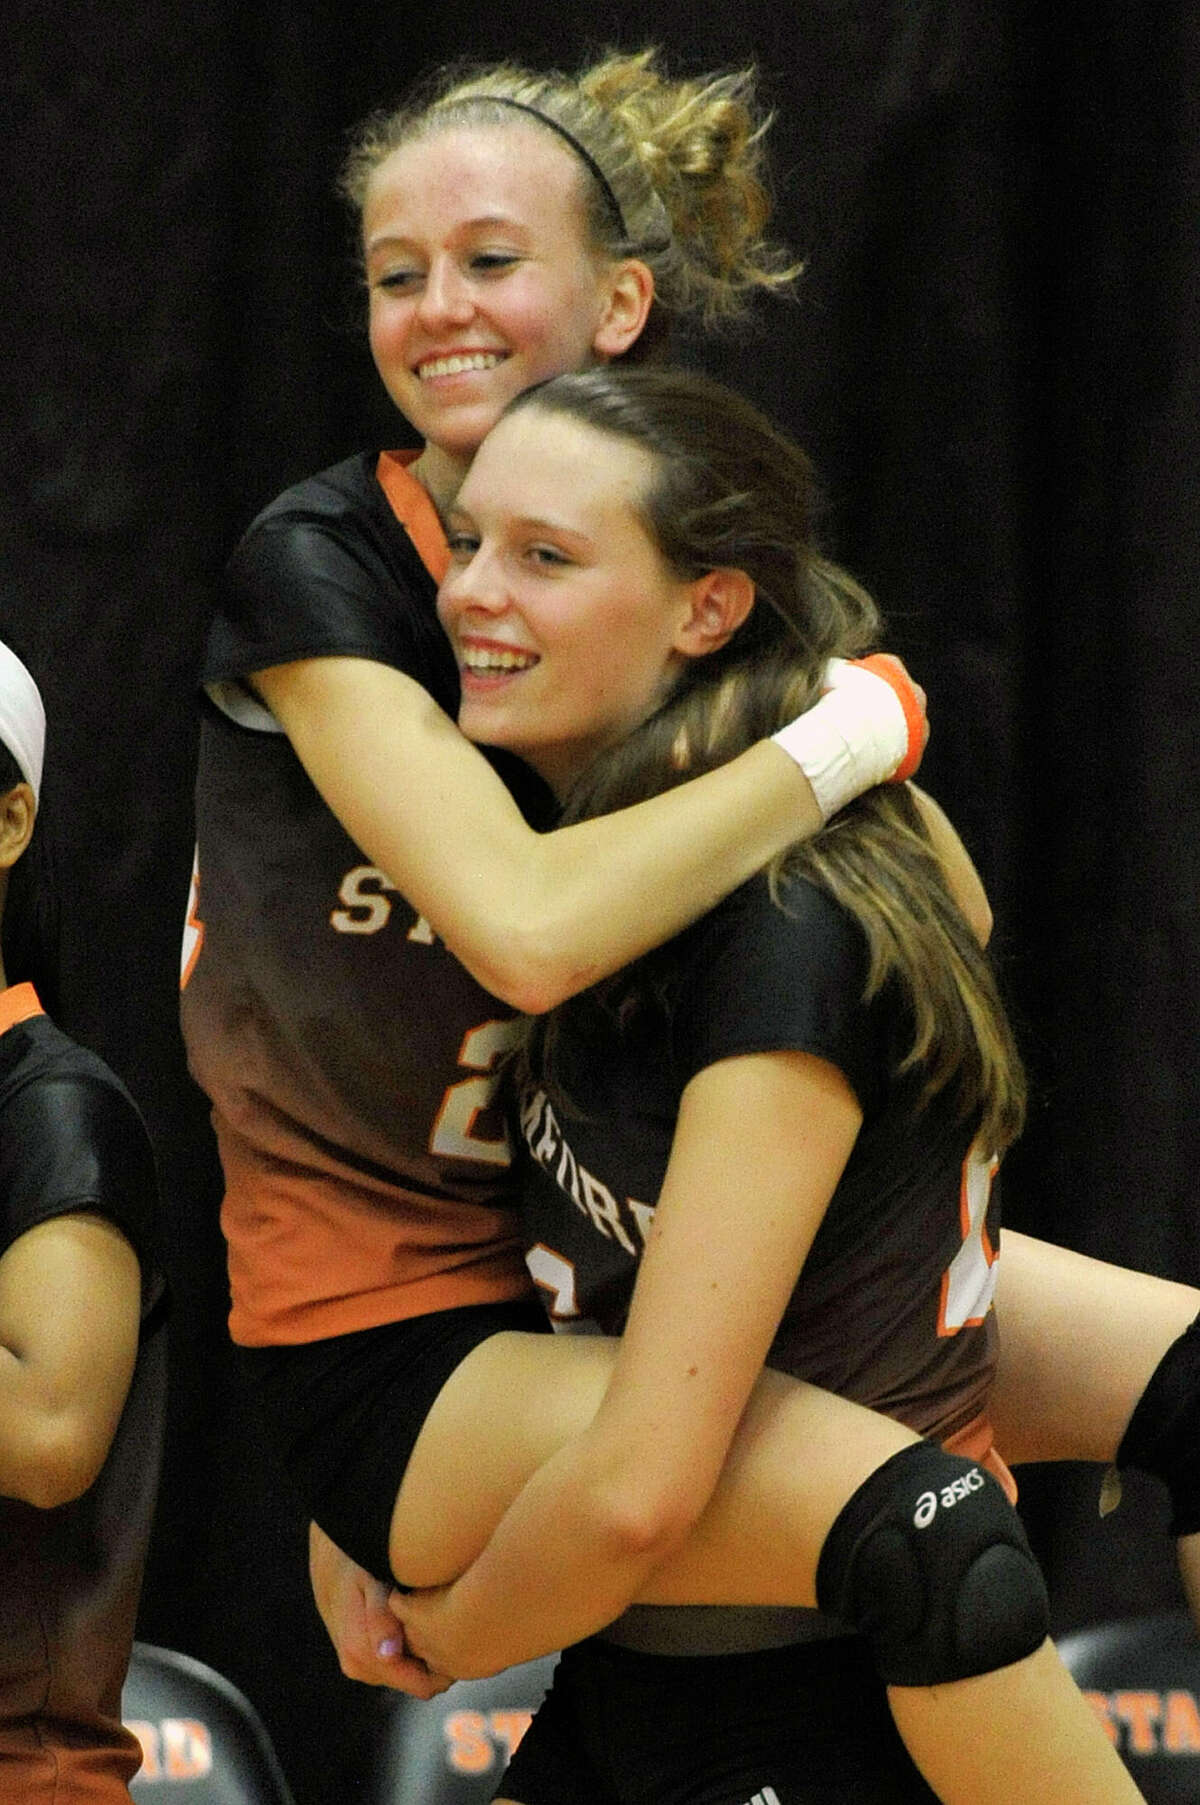 Stamford's Cali Schenkel carries her team mate Liisa Balazs after beating Greenwich, 3-2, in their Class LL second round playoff volleyball match at Stamford High School in Stamford, Conn., on Thursday, Nov. 6, 2014.